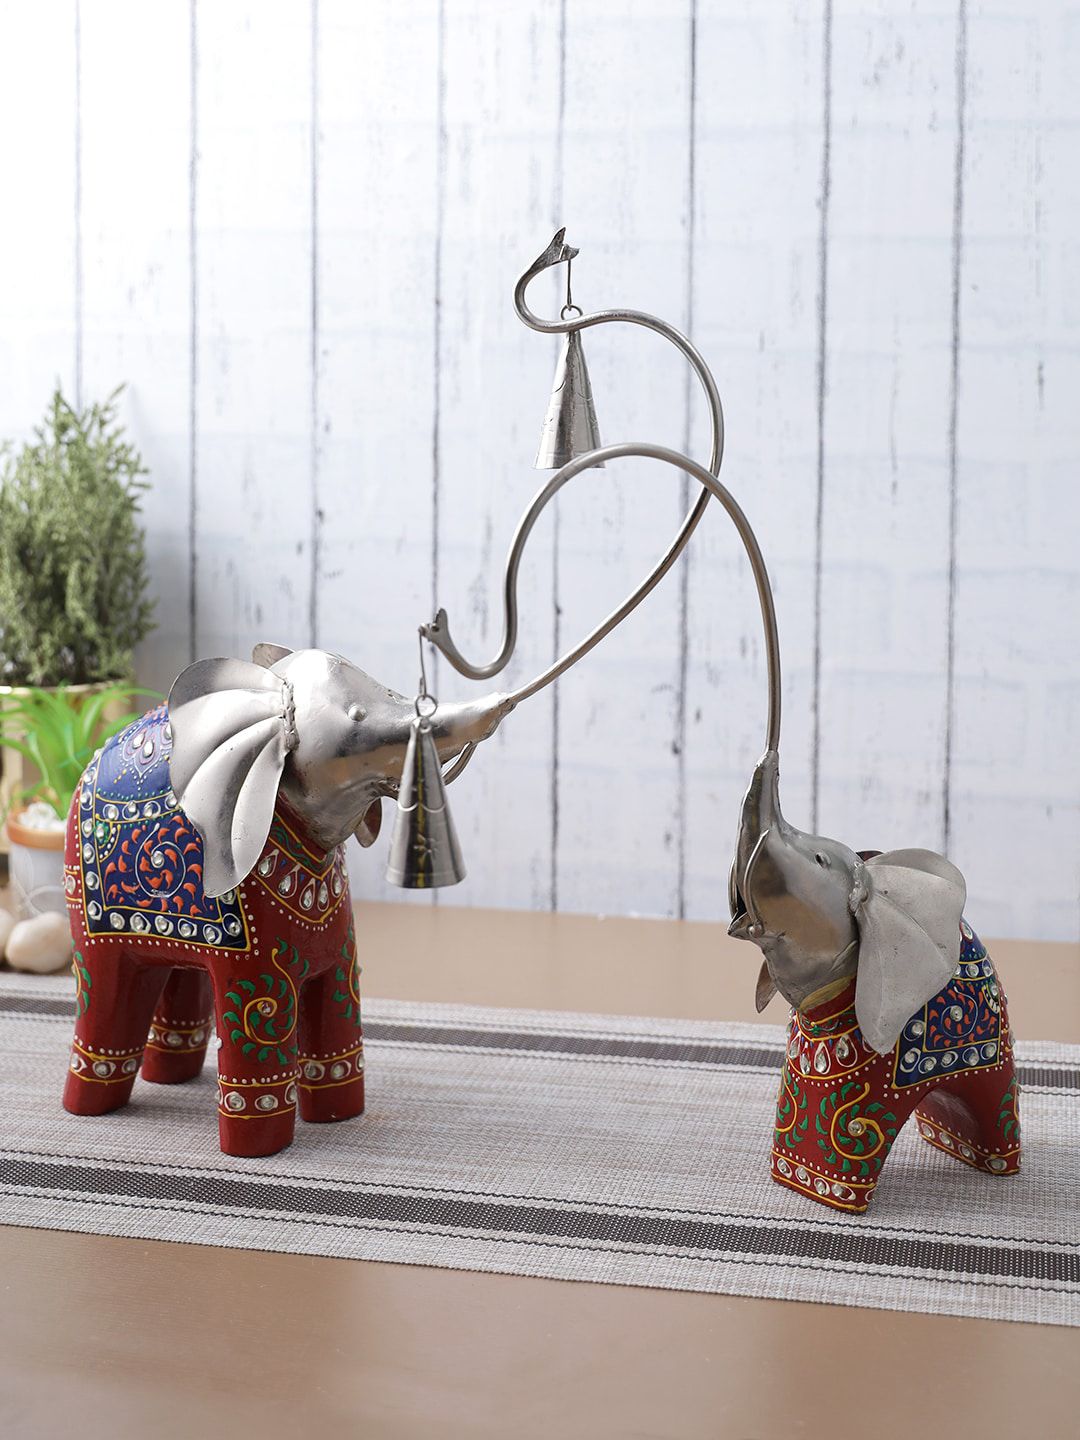 Aapno Rajasthan Set Of 2 Silver & Blue Elephant Figurine Showpiece Set Price in India